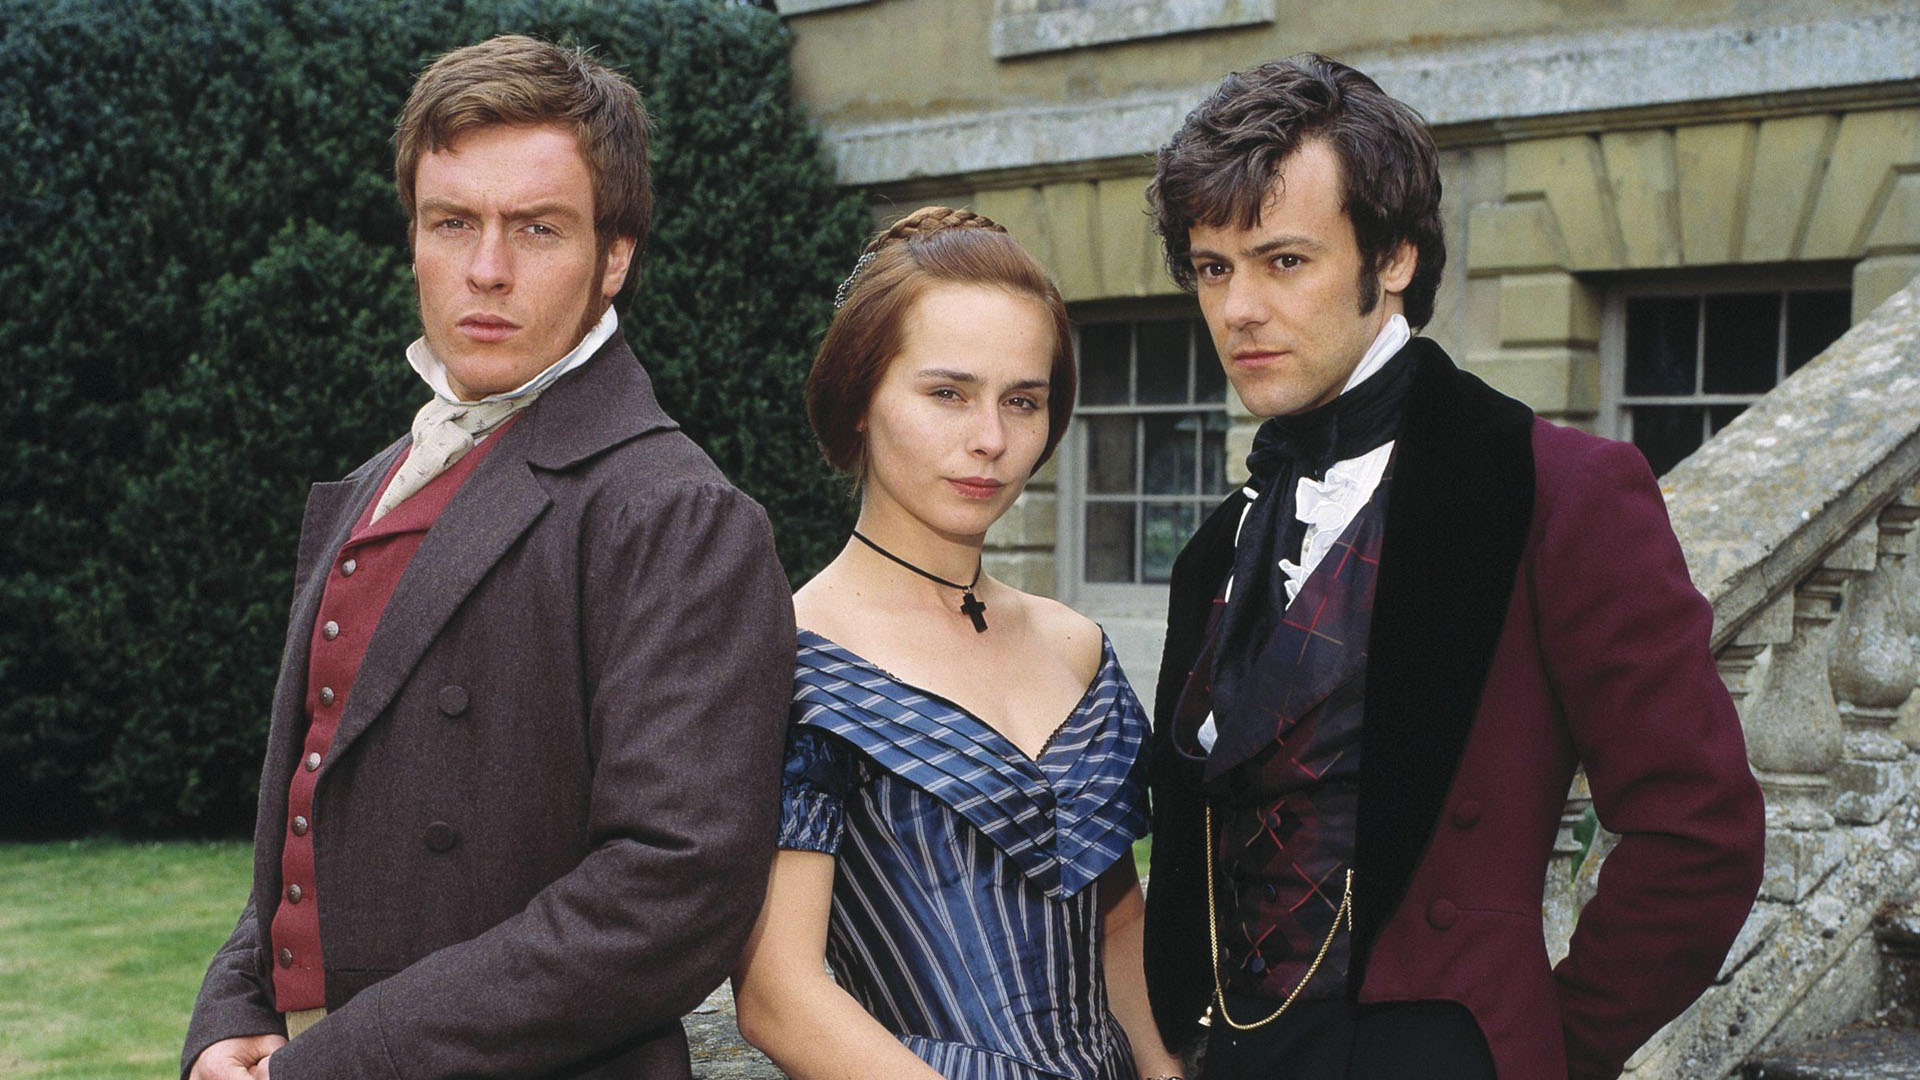 Show The Tenant of Wildfell Hall